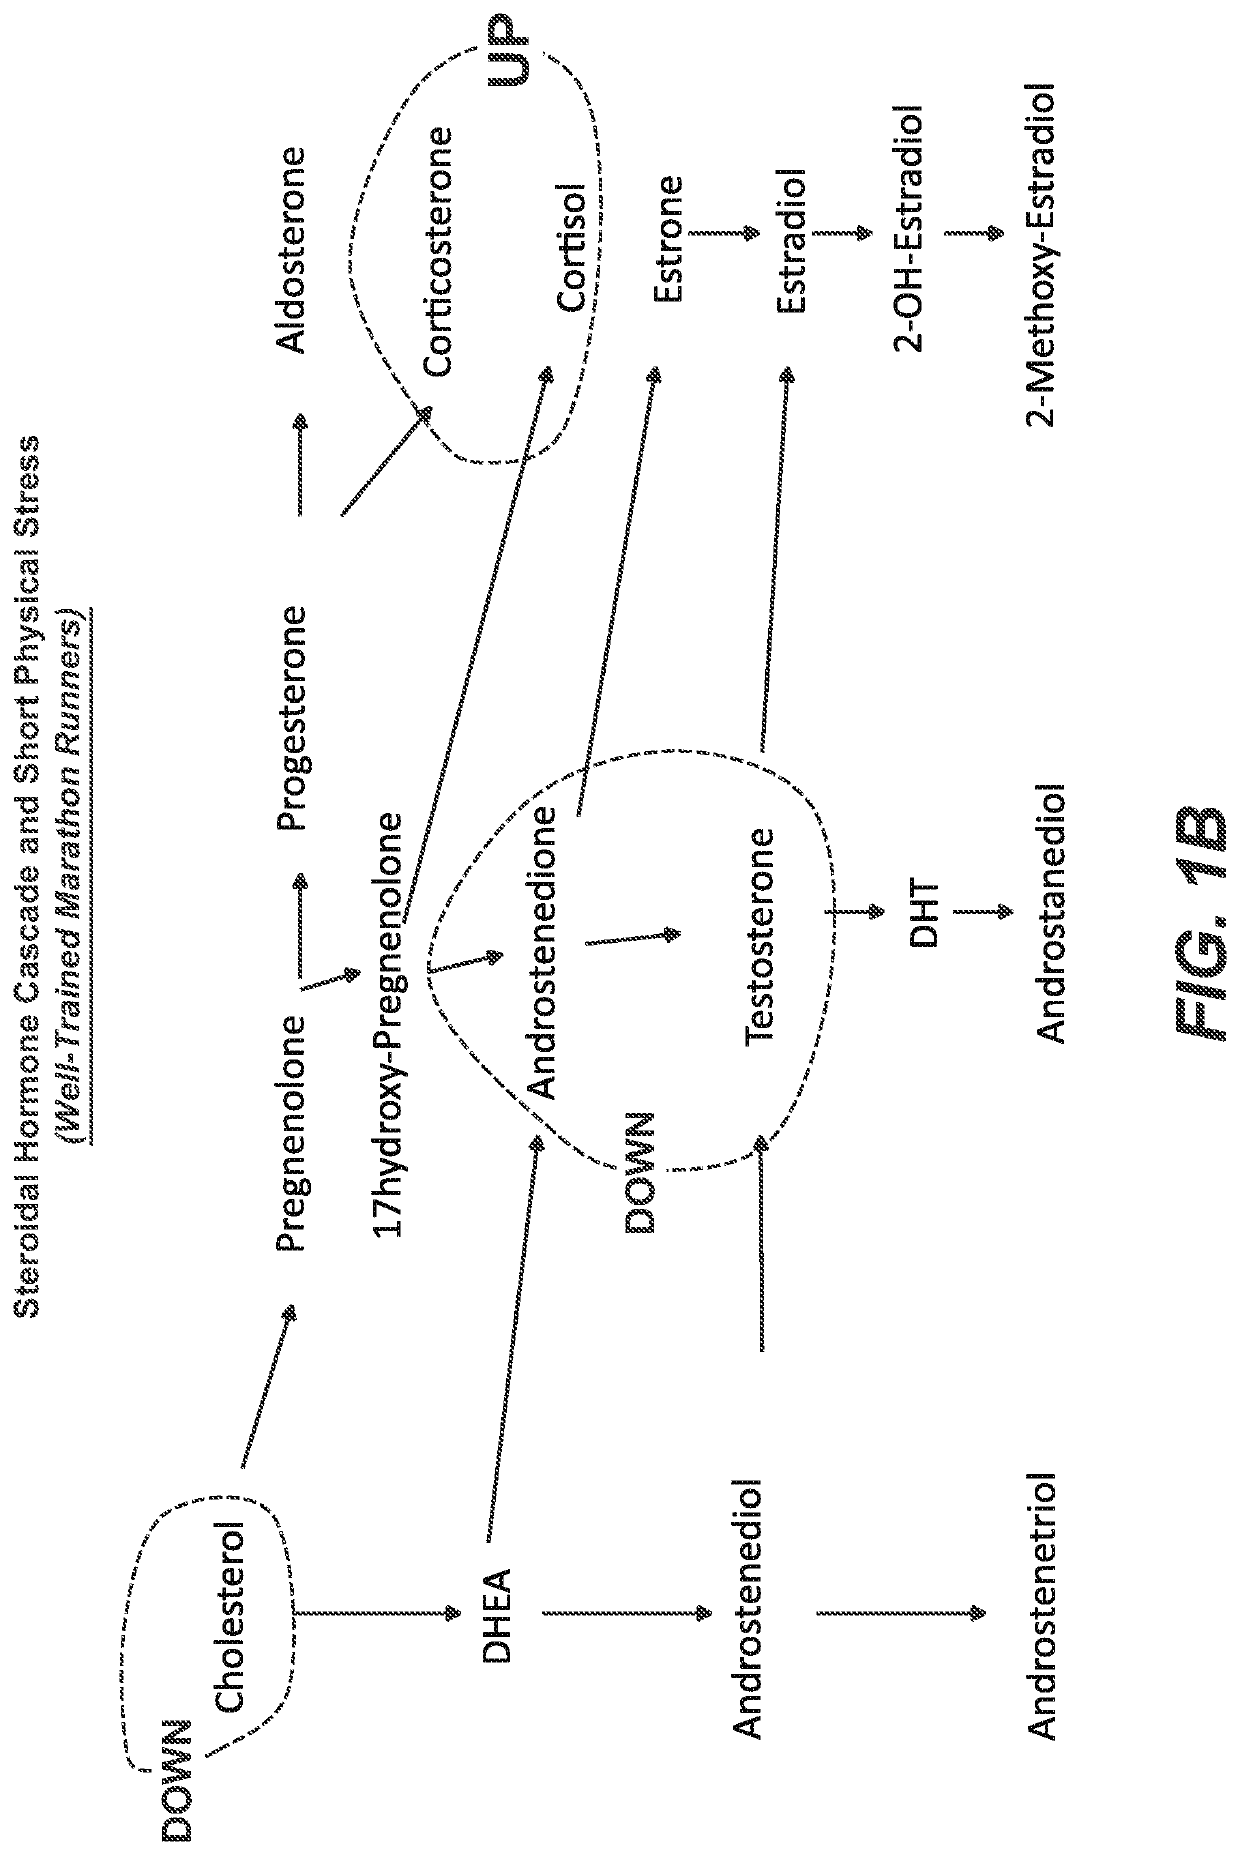 Compositions and methods to regulate hormonal cascades in stress disorders